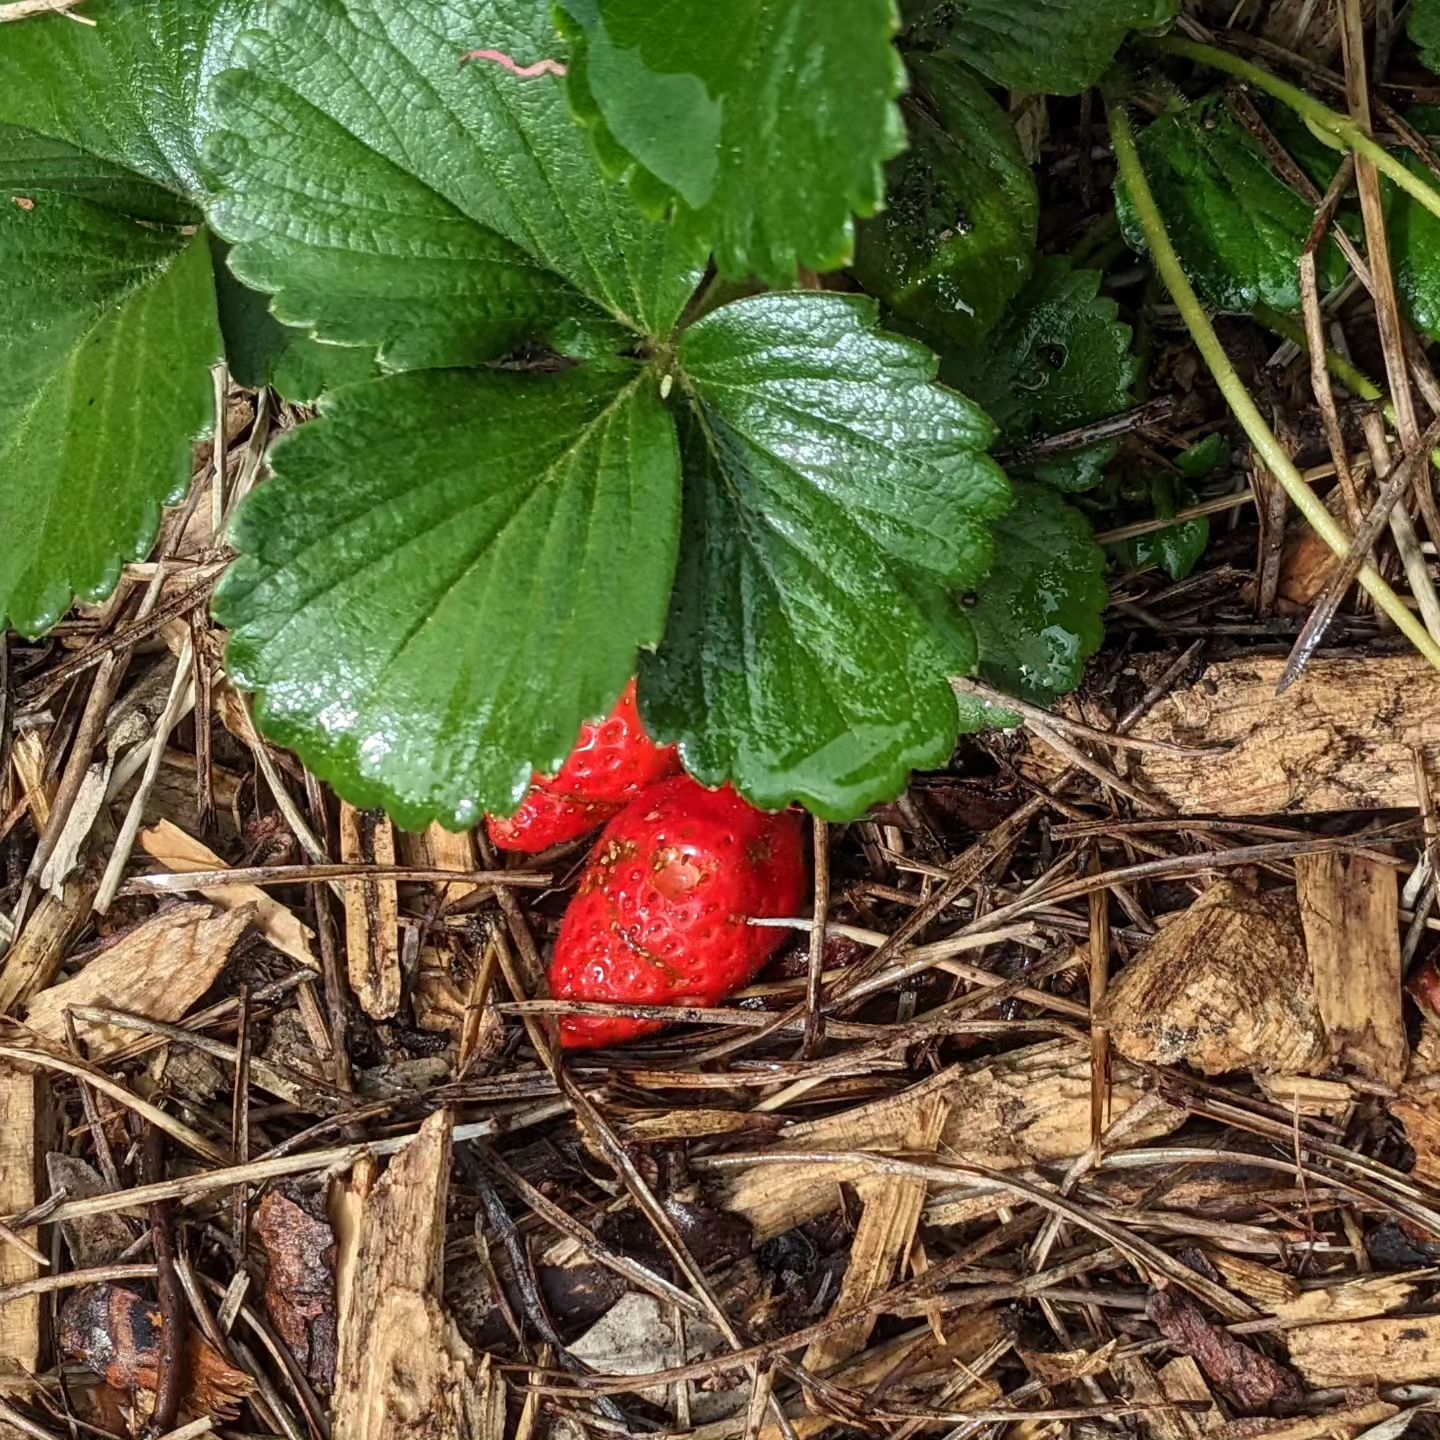 The strawberries are popping up everywhere